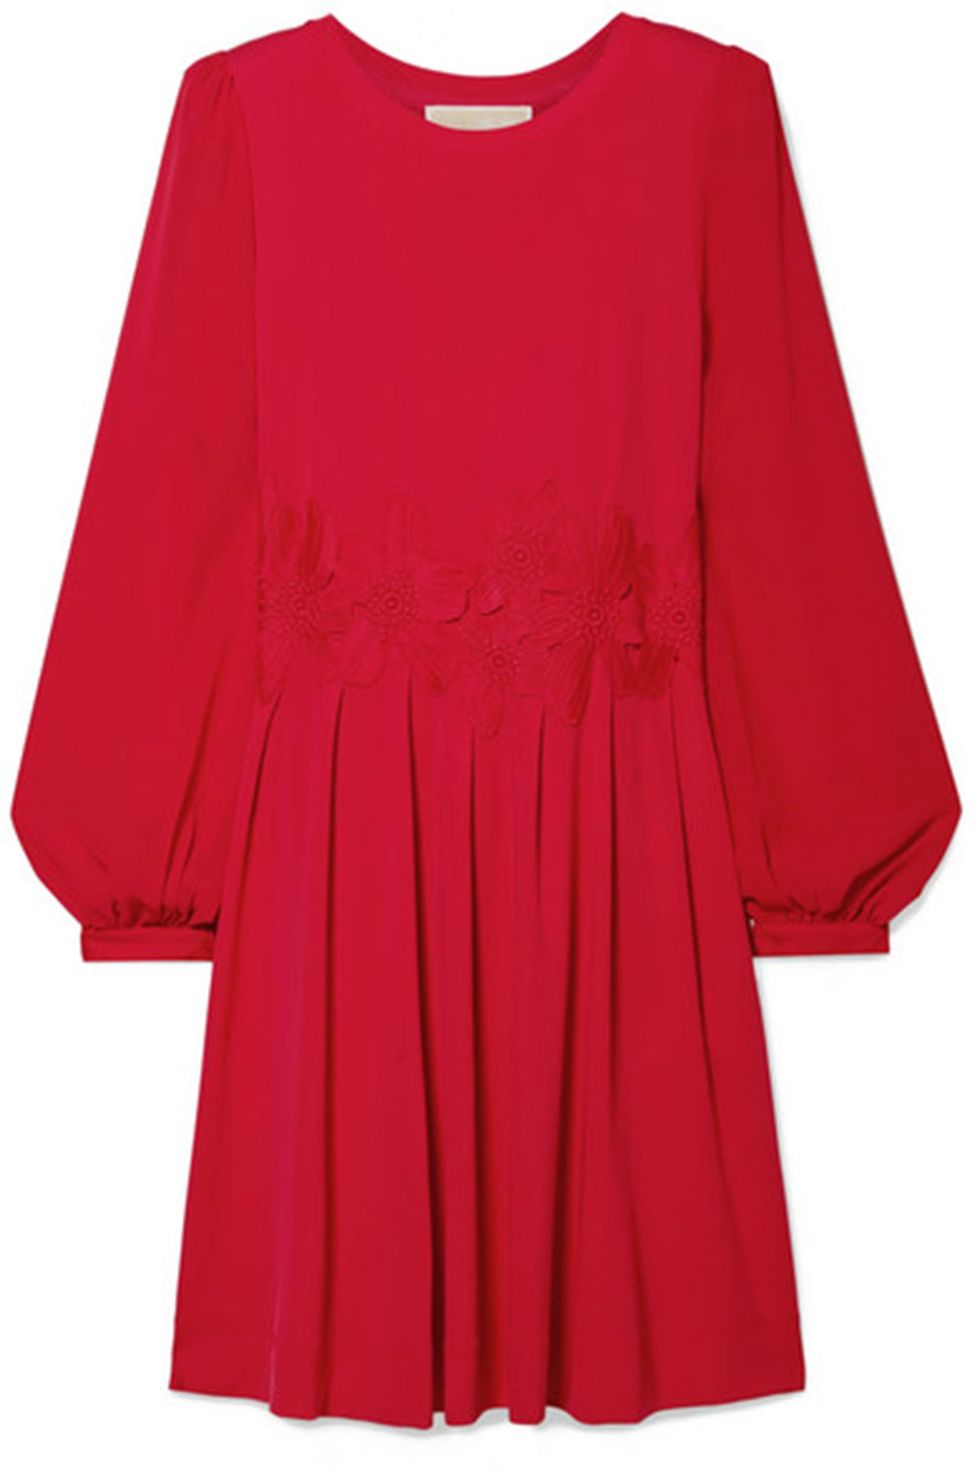 Clothing, Sleeve, Red, Dress, Day dress, Pink, Outerwear, Magenta, Cocktail dress, Blouse, 